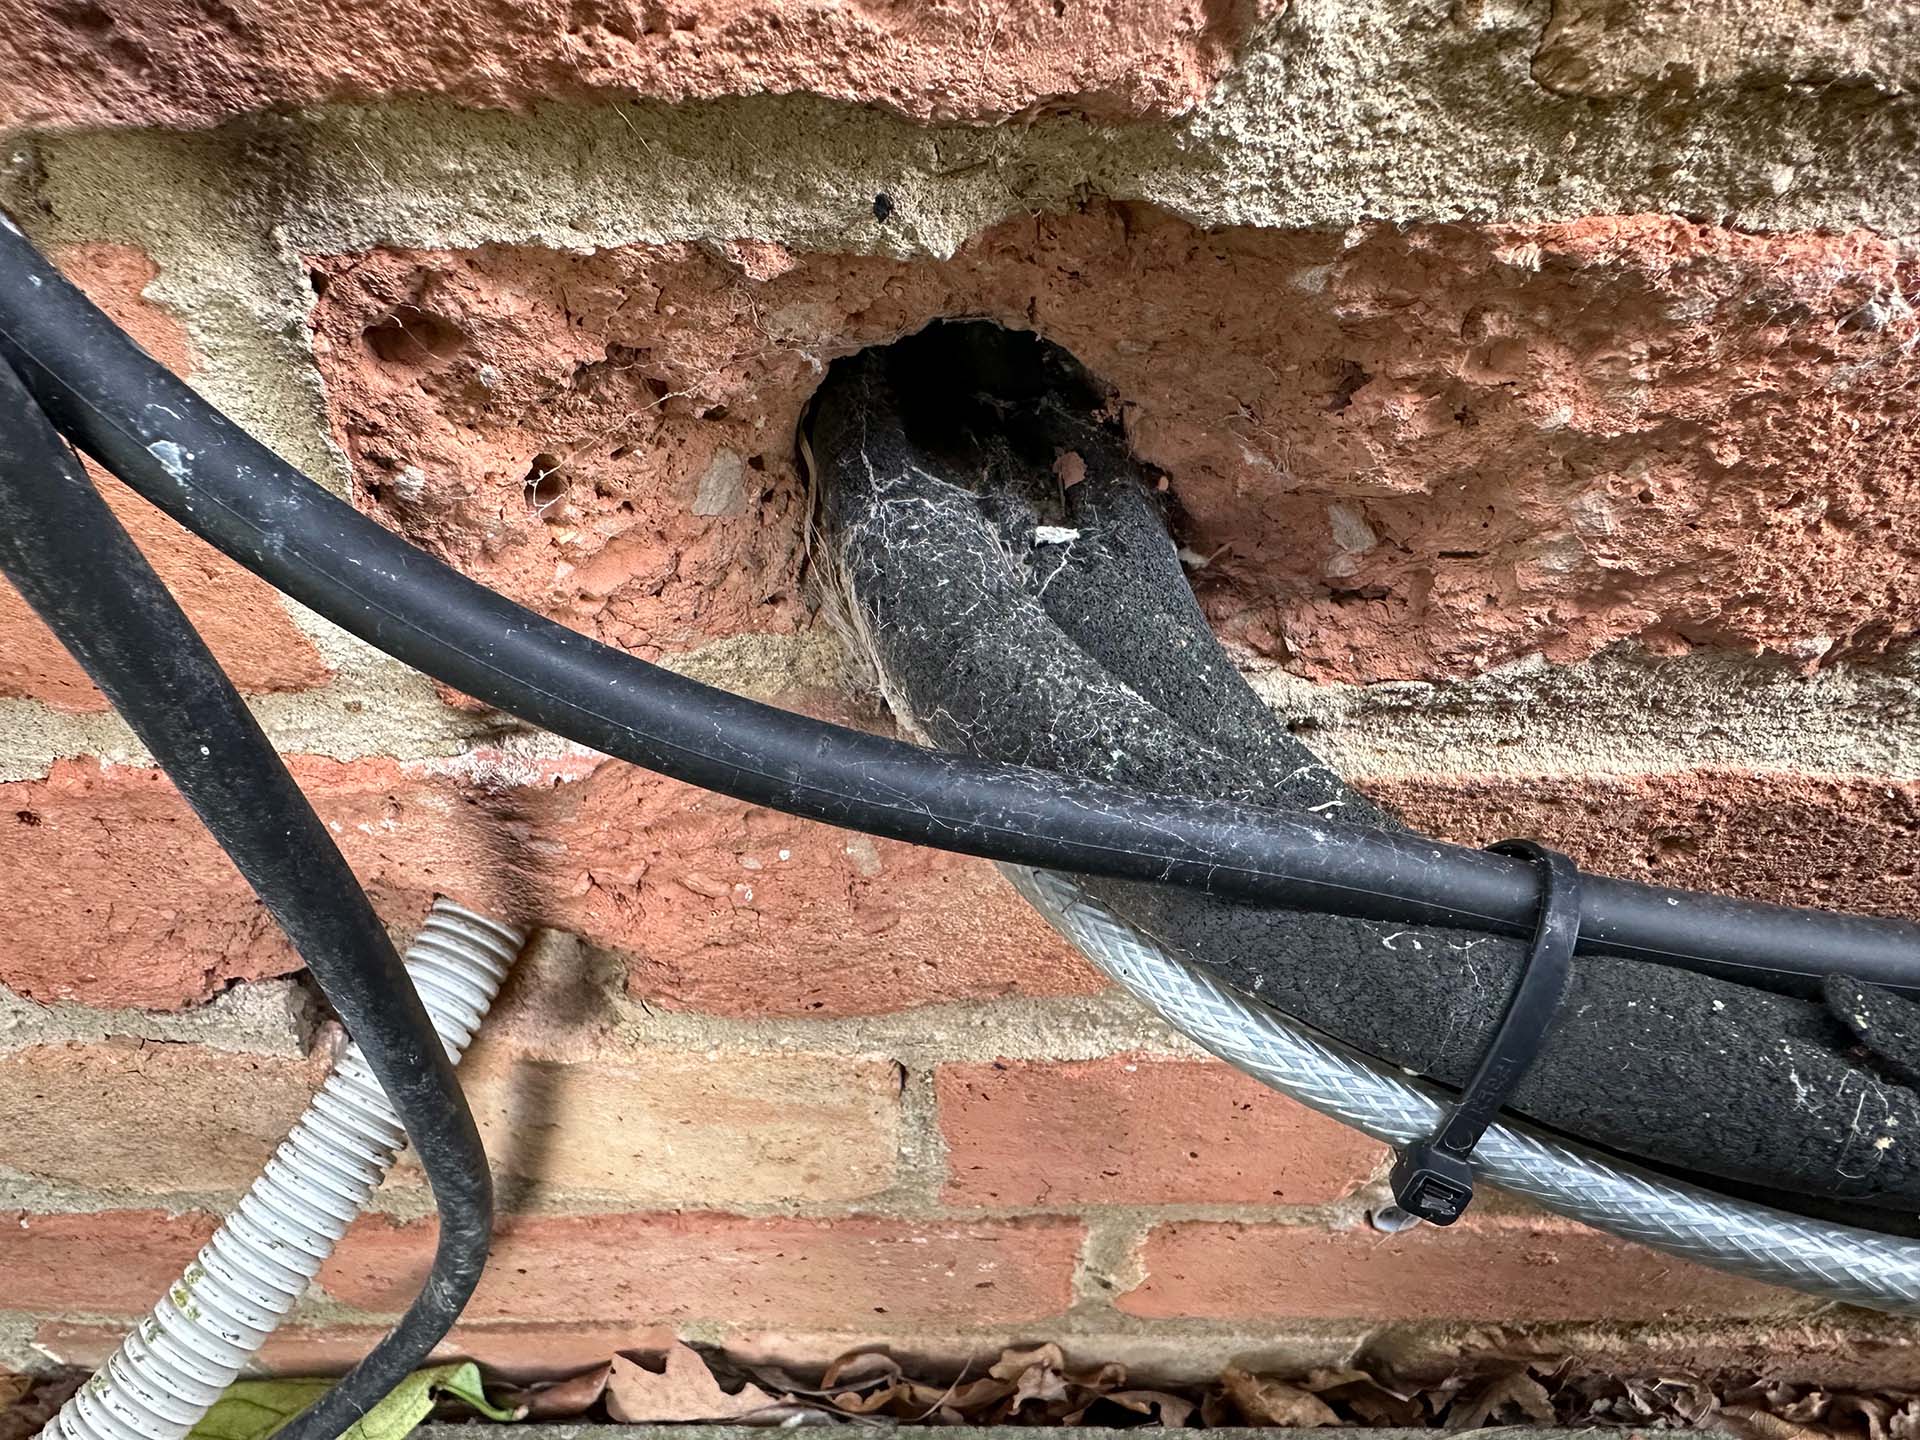 Effective Pest Proofing Strategies for Properties the picture shows a gap around utility wires entering a building, this is big enough for mice, rats, and various other pests to gain entry to the home